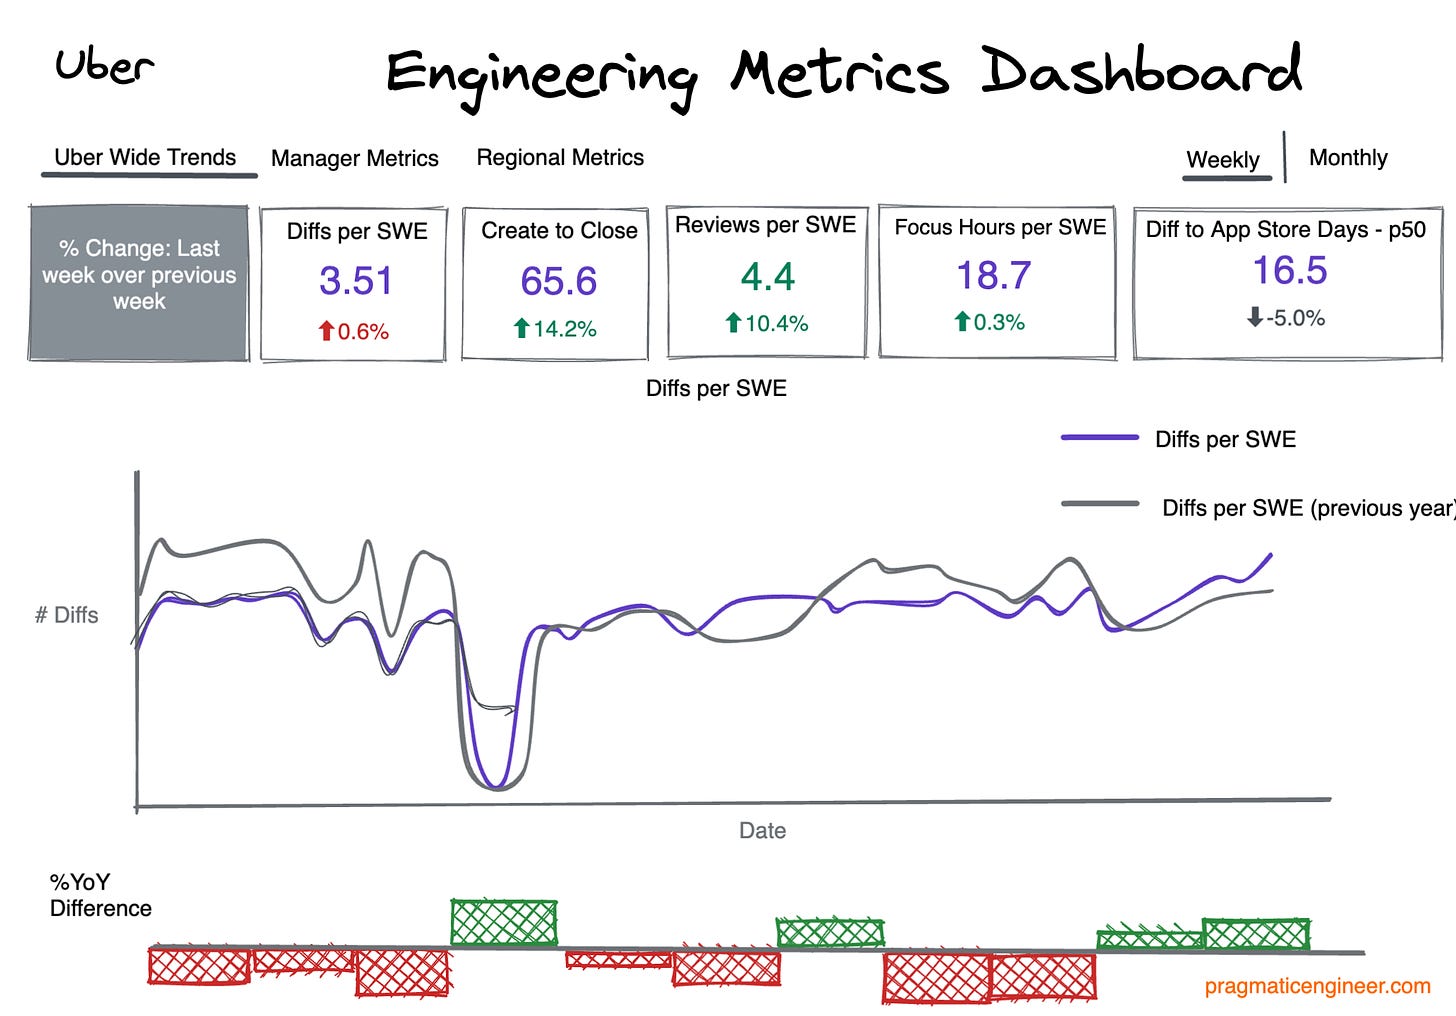 A mock-up of Uber’s Eng Metrics Dashboard, based on the tool I’ve viewed. The numbers and data in this and other mock-ups are for illustration purposes and are not reflective of the actual internal data at Uber.